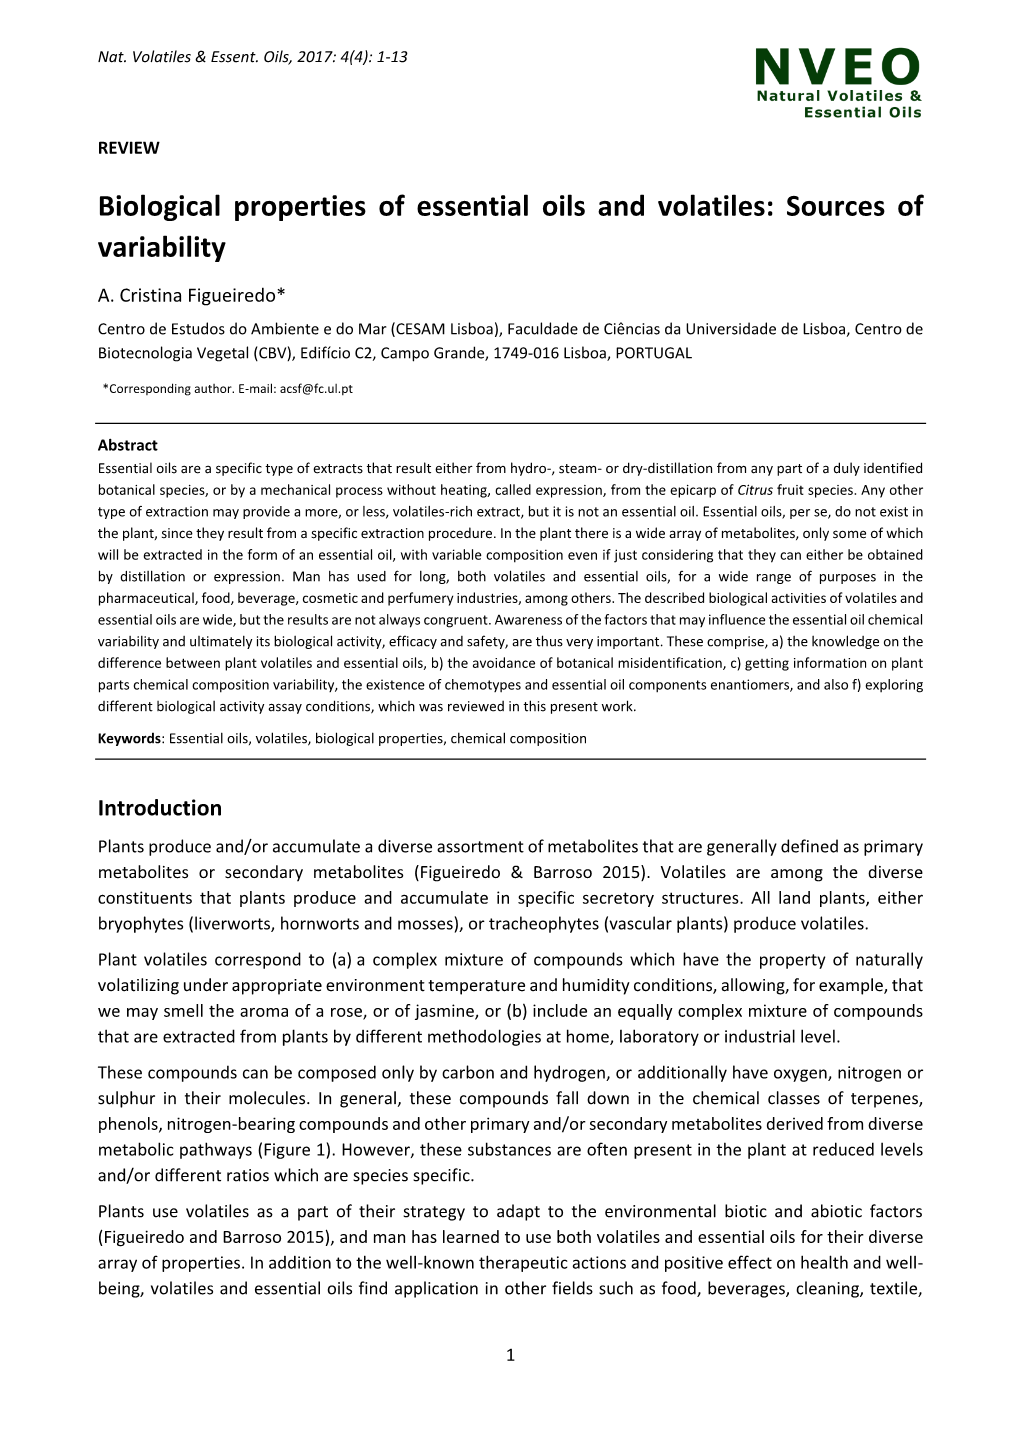 Biological Properties of Essential Oils and Volatiles: Sources of Variability